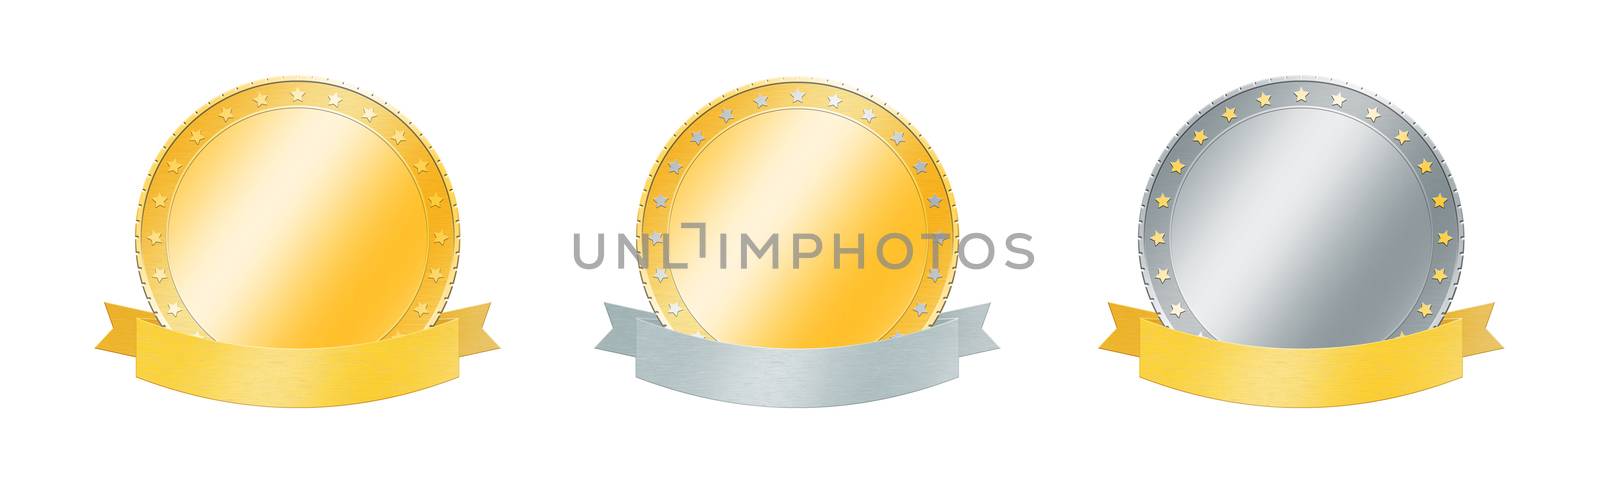 Gold and silver metal badges with ribbon banners by BreakingTheWalls